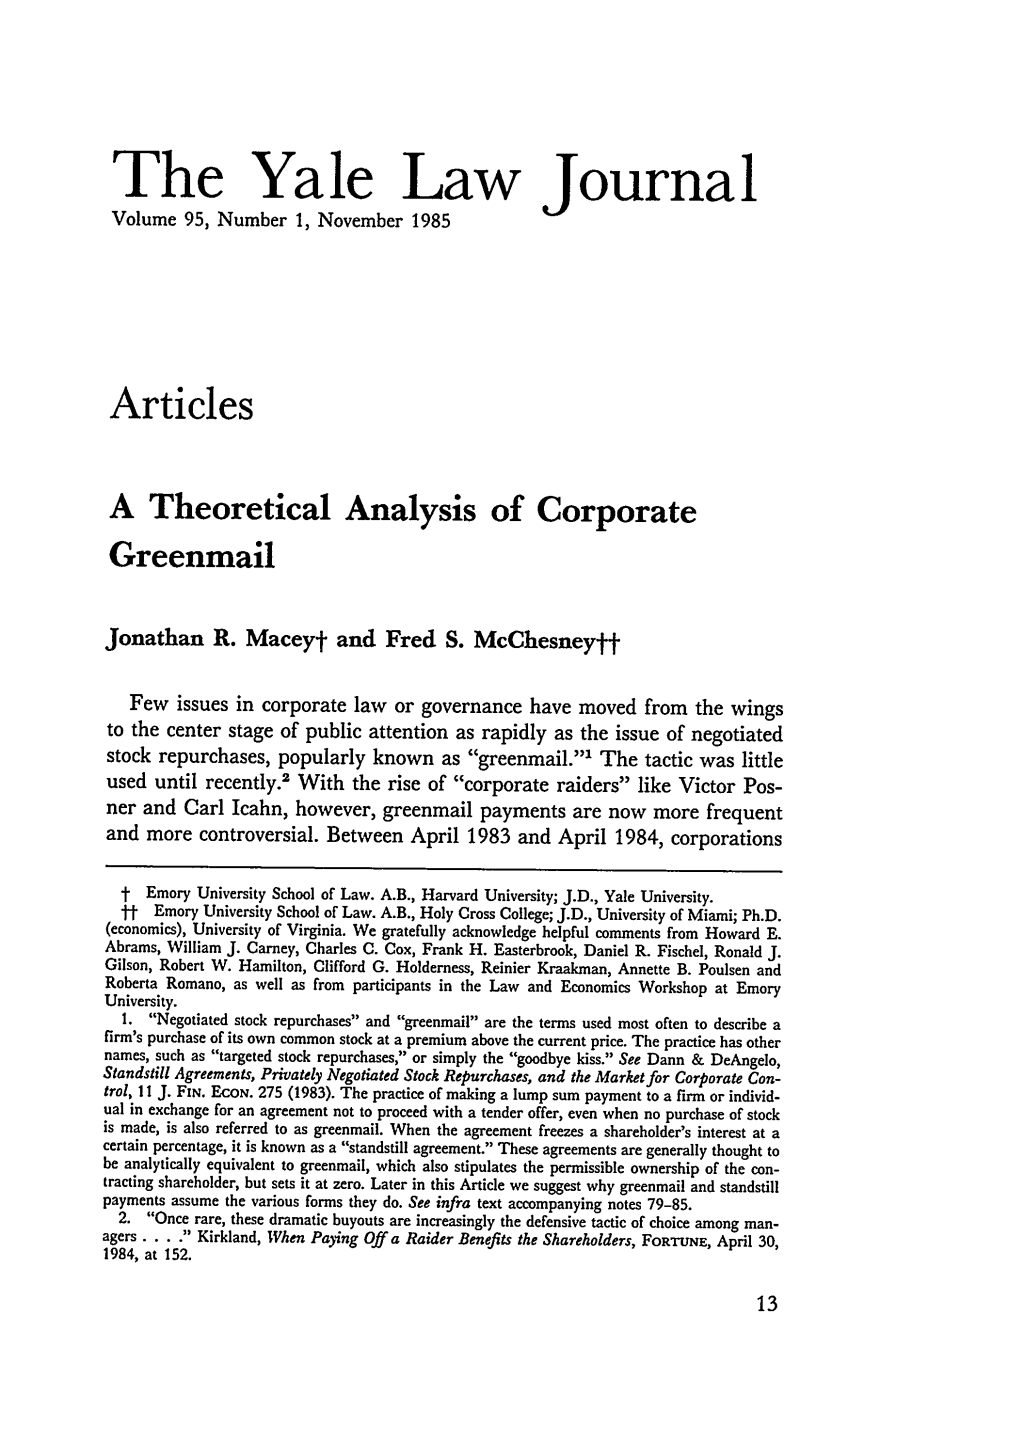 A Theoretical Analysis of Corporate Greenmail